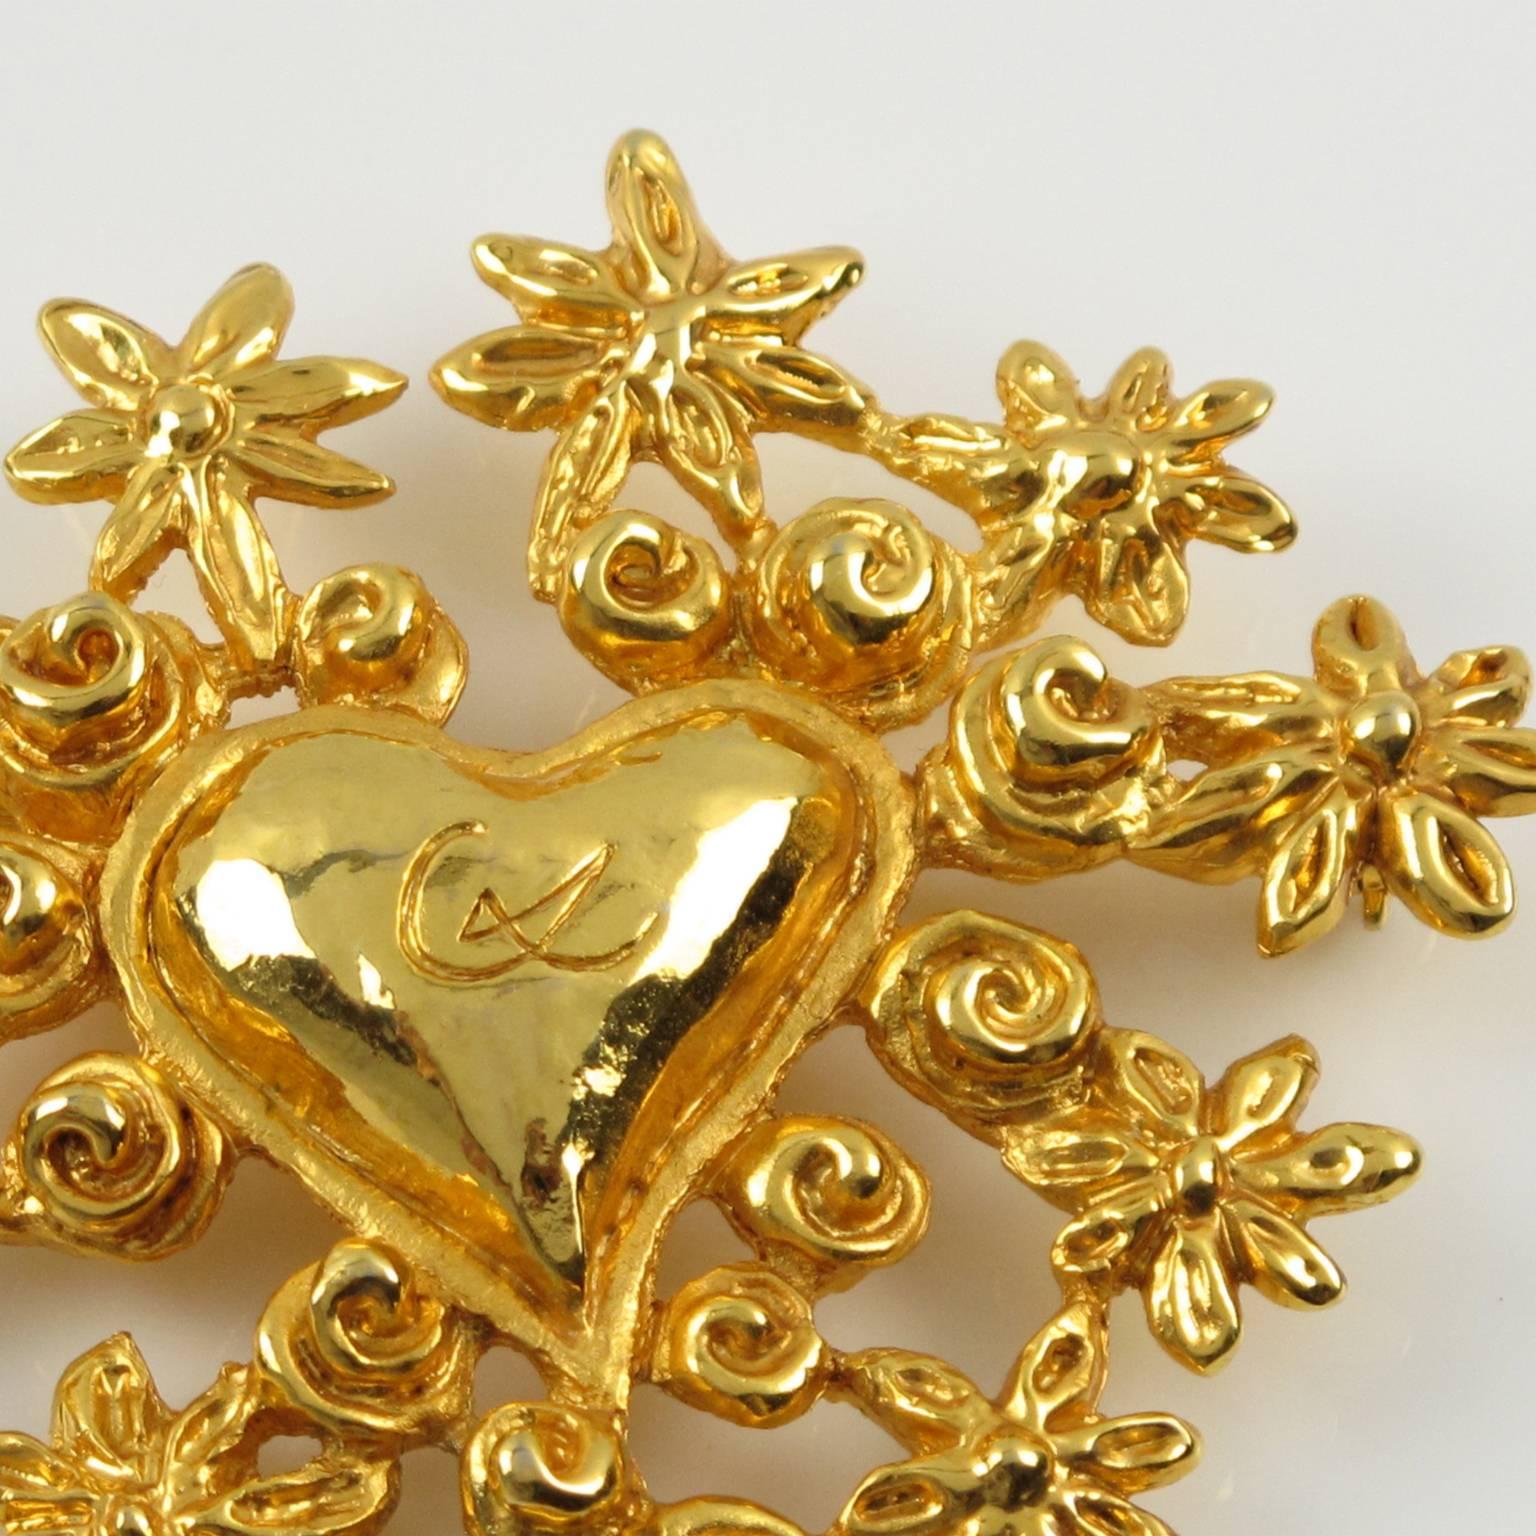 Christian Lacroix Iconic Pin Brooch Goldtone Heart & Flowers 1